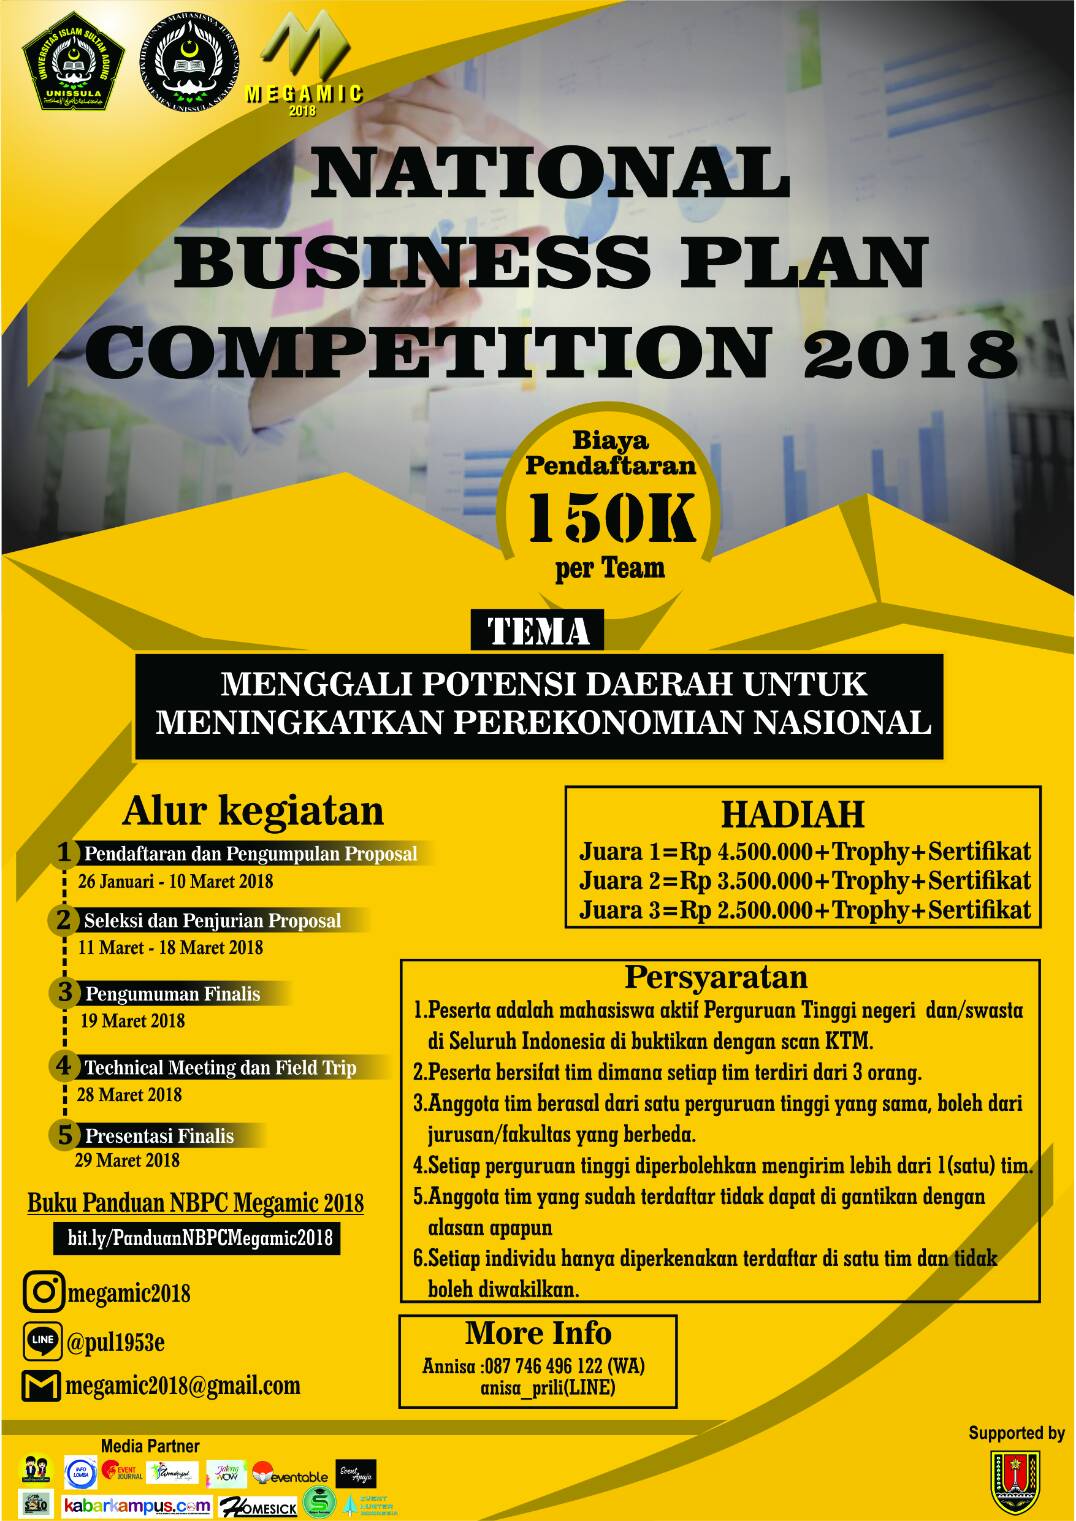 contoh ide business plan competition